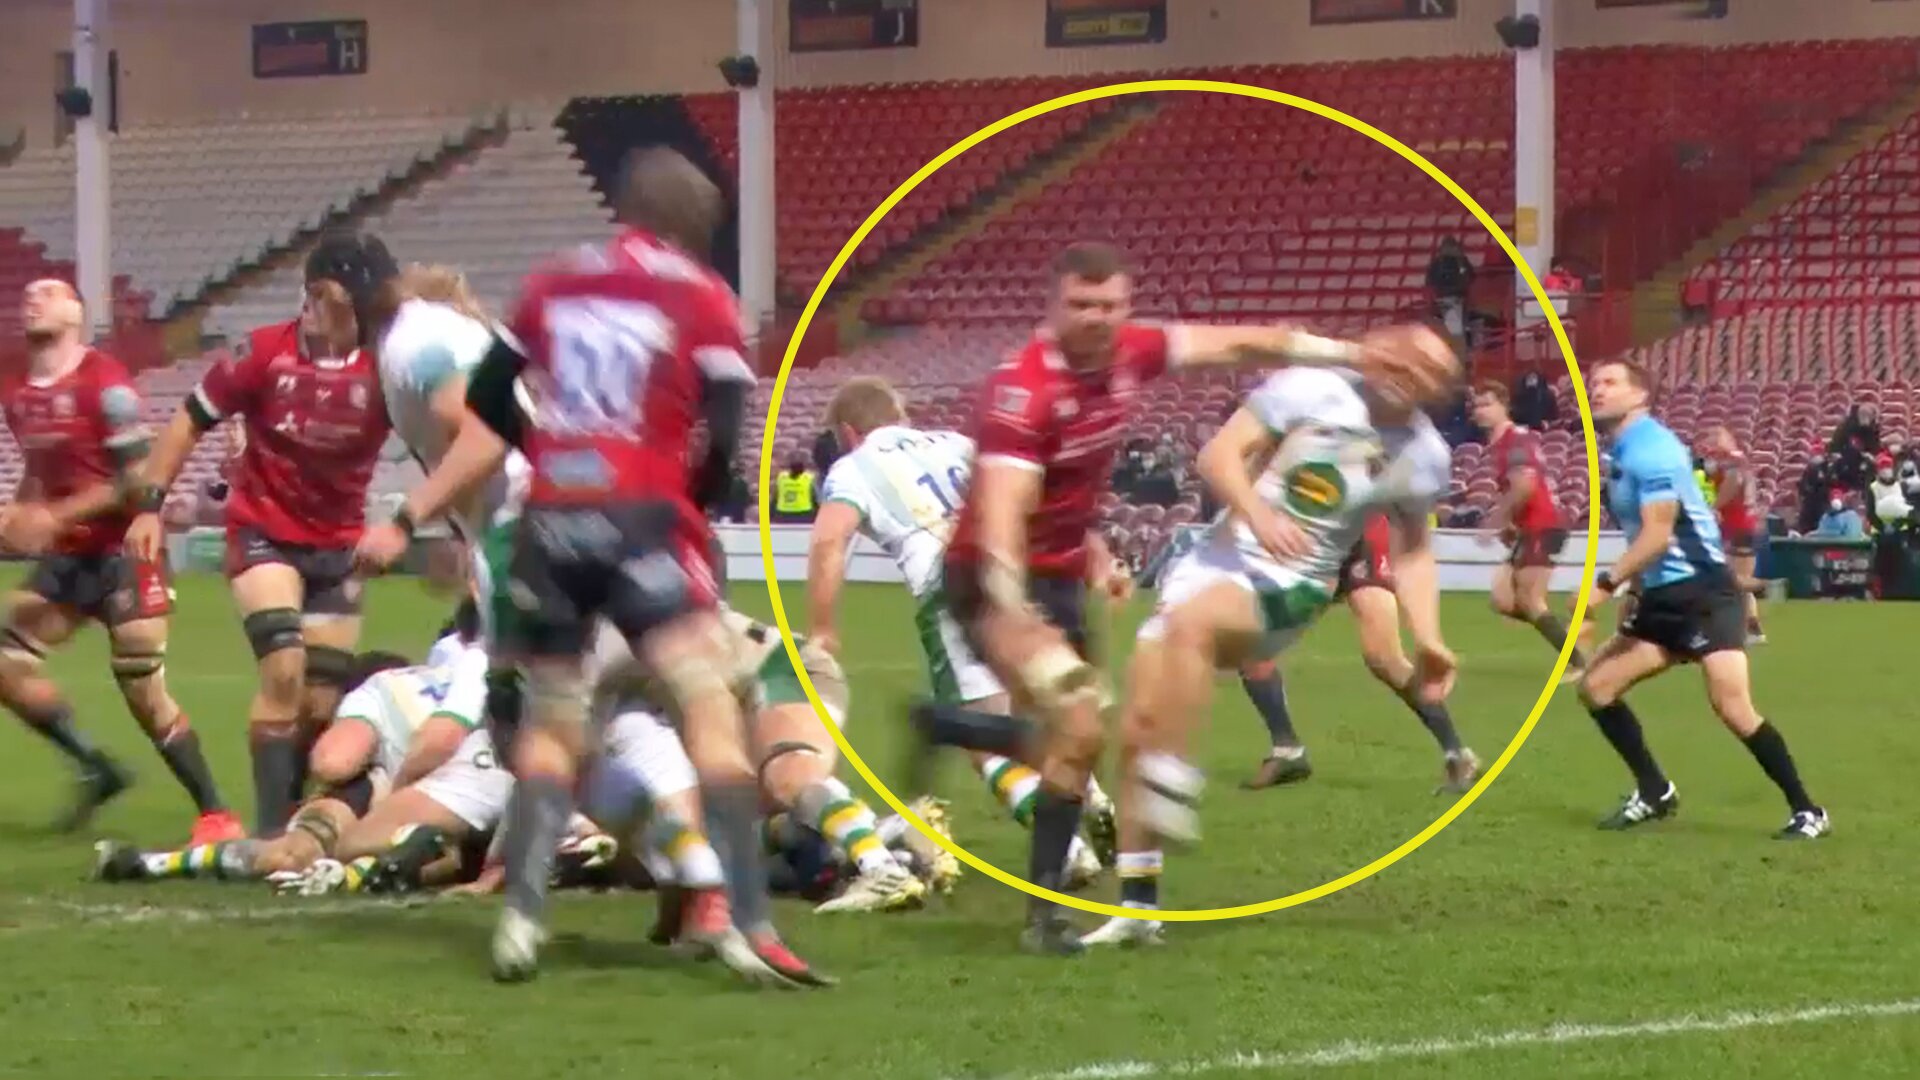 Fan fury as apparent punch in Premiership clash is ignored by match officials